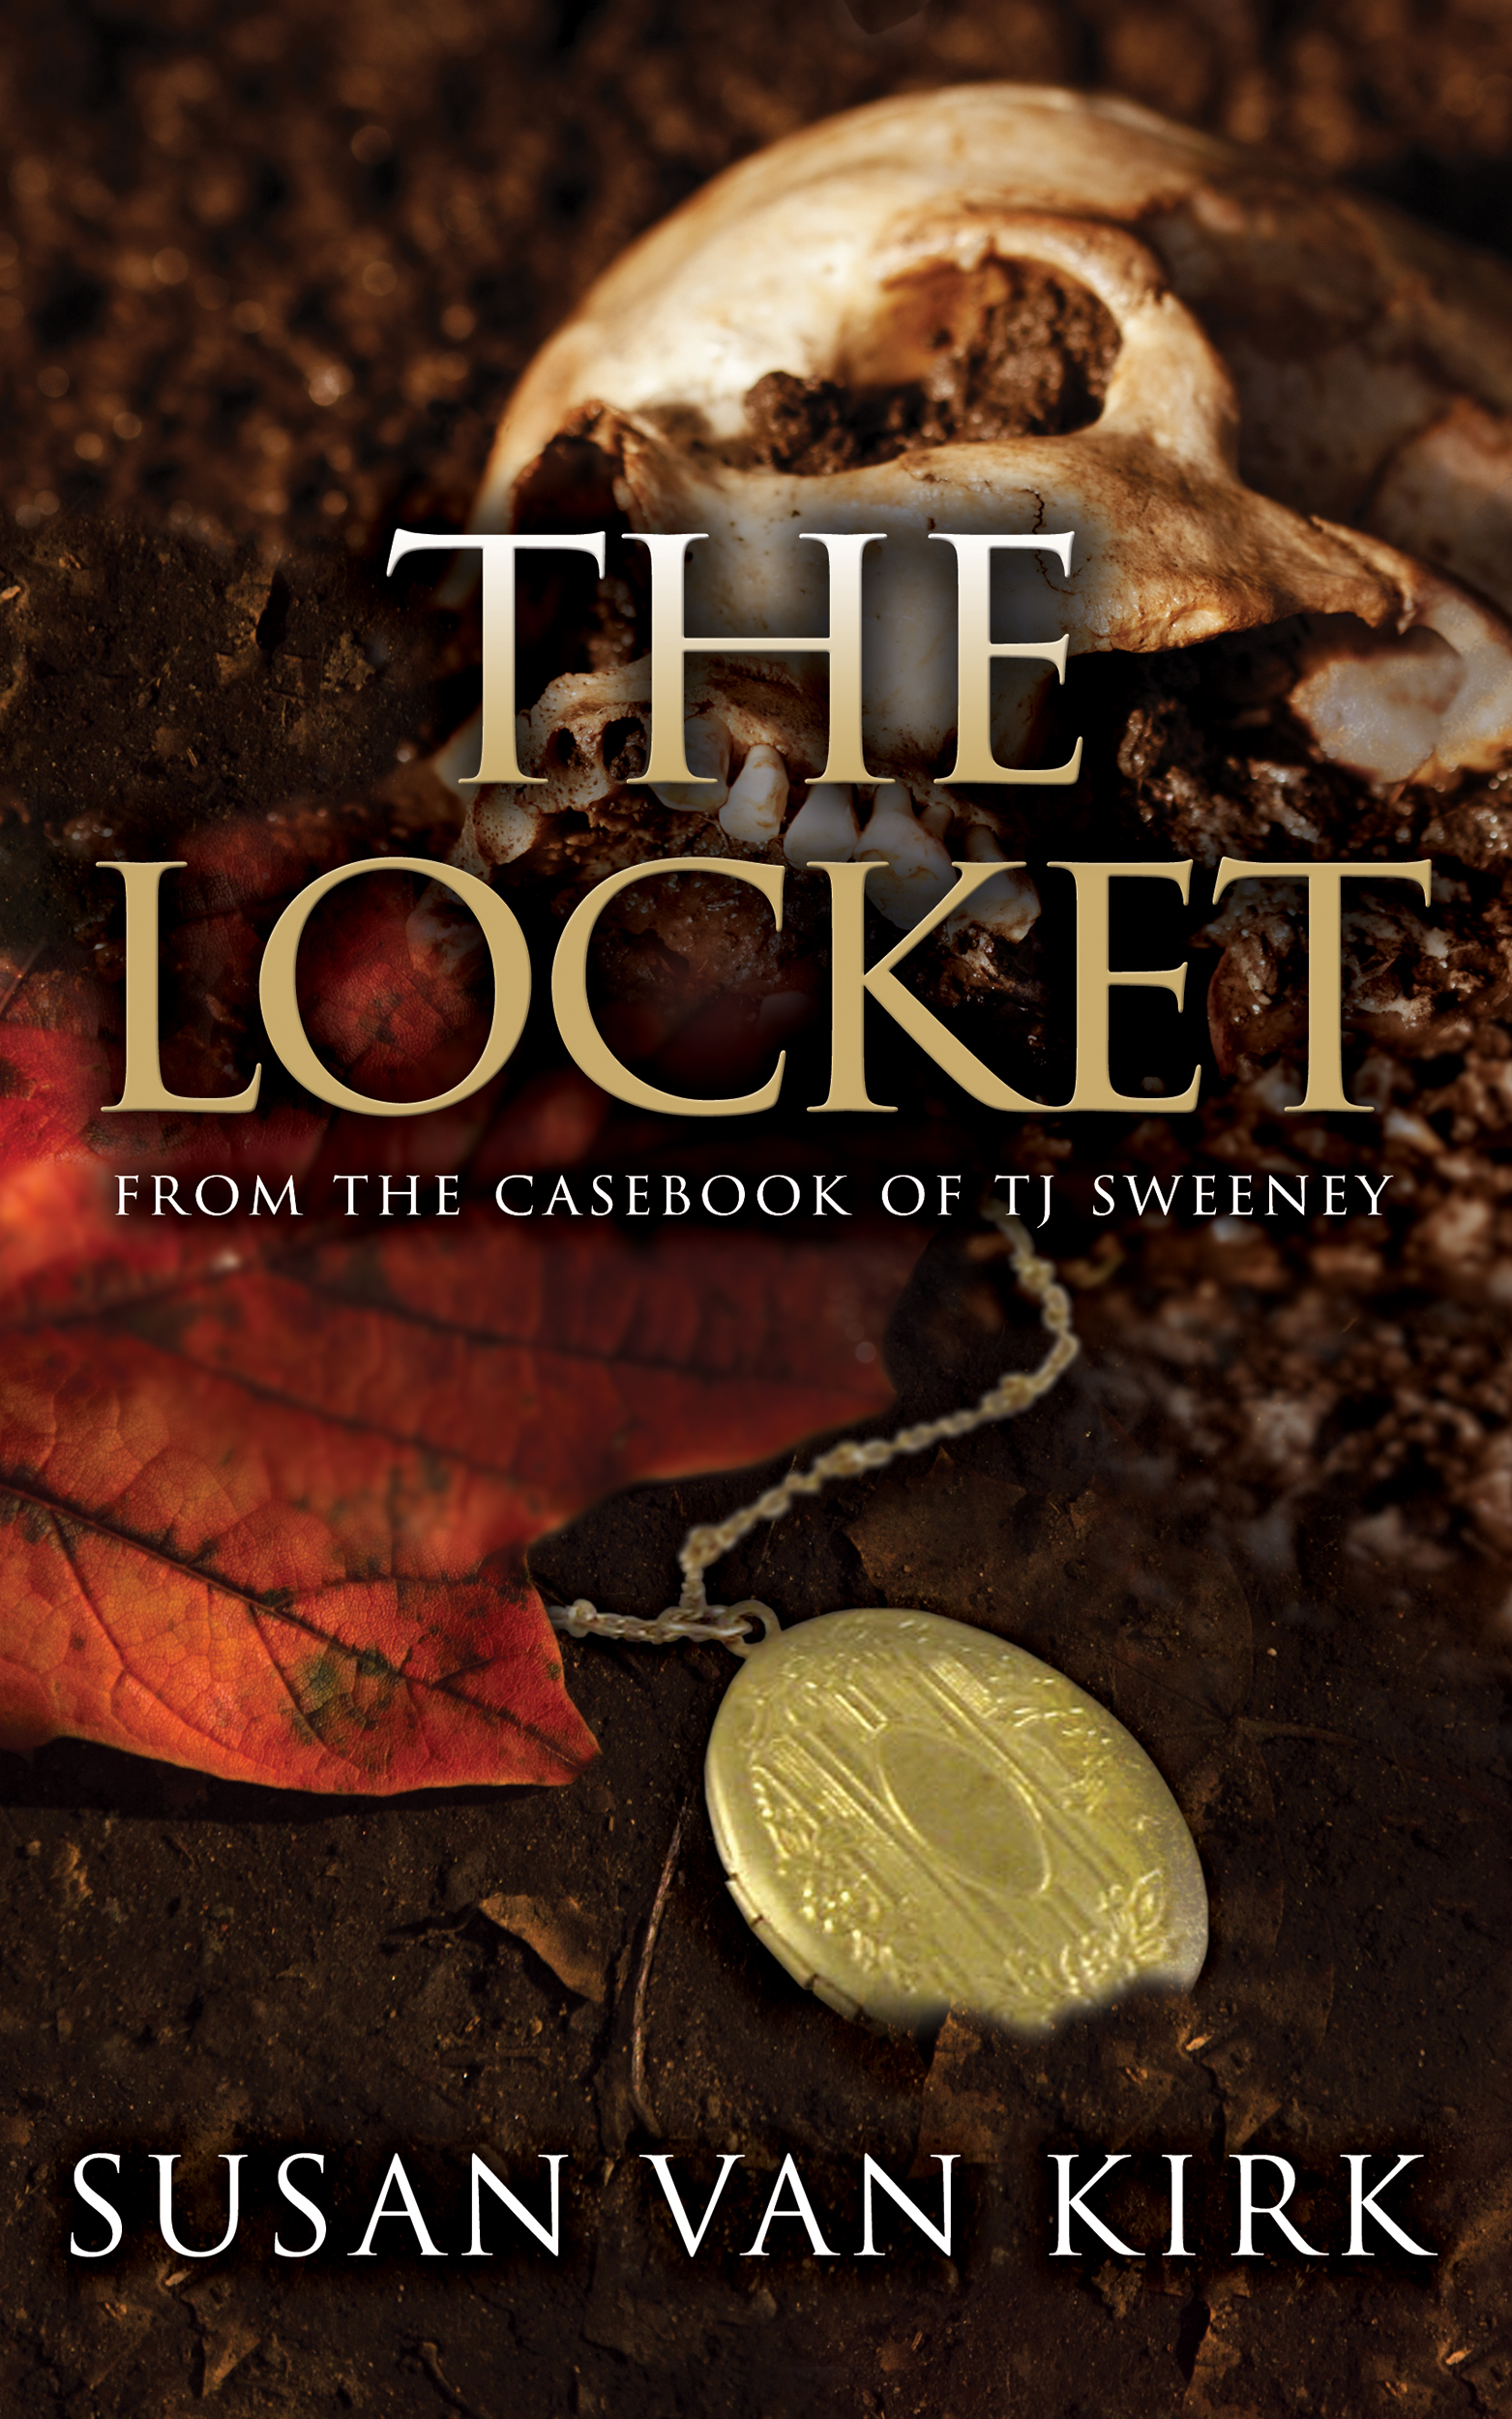 Book cover of the Locket, showing a gold locket on the ground. 